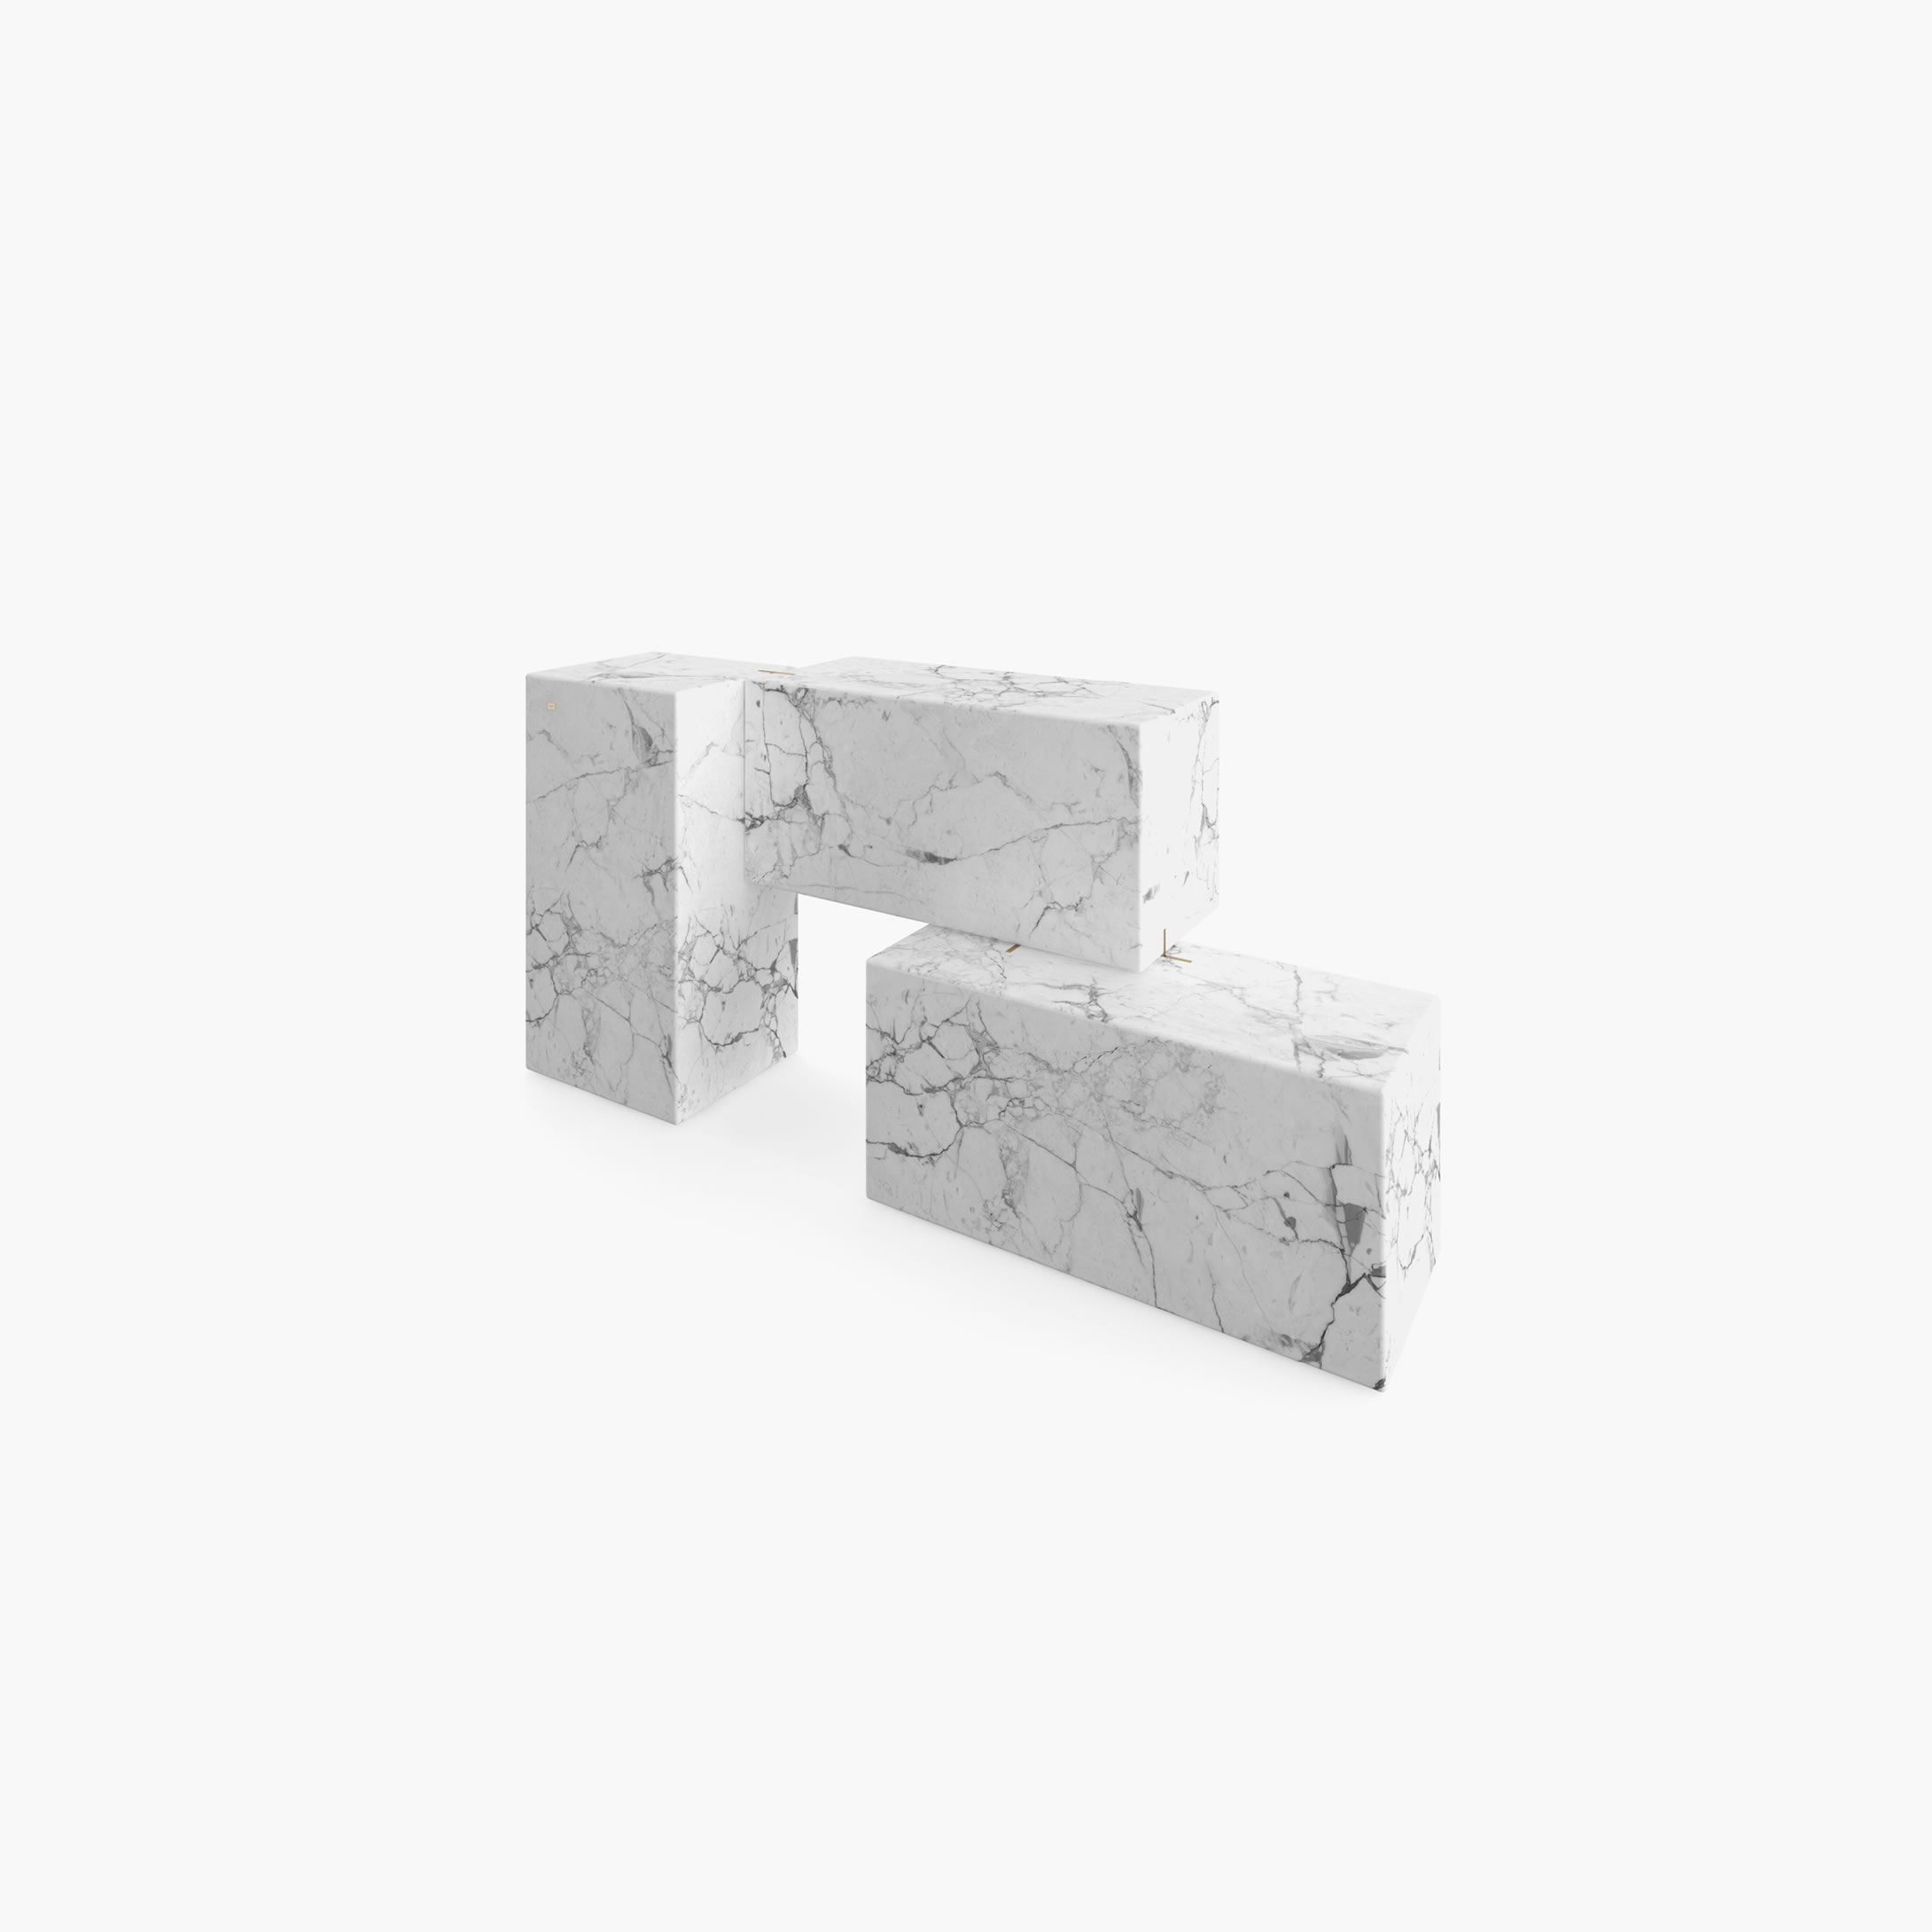 Console square cuboids White Arabescato Marble geometric Living Room masterpieces Consoles  Sideboards FS 7 FELIX SCHWAKE